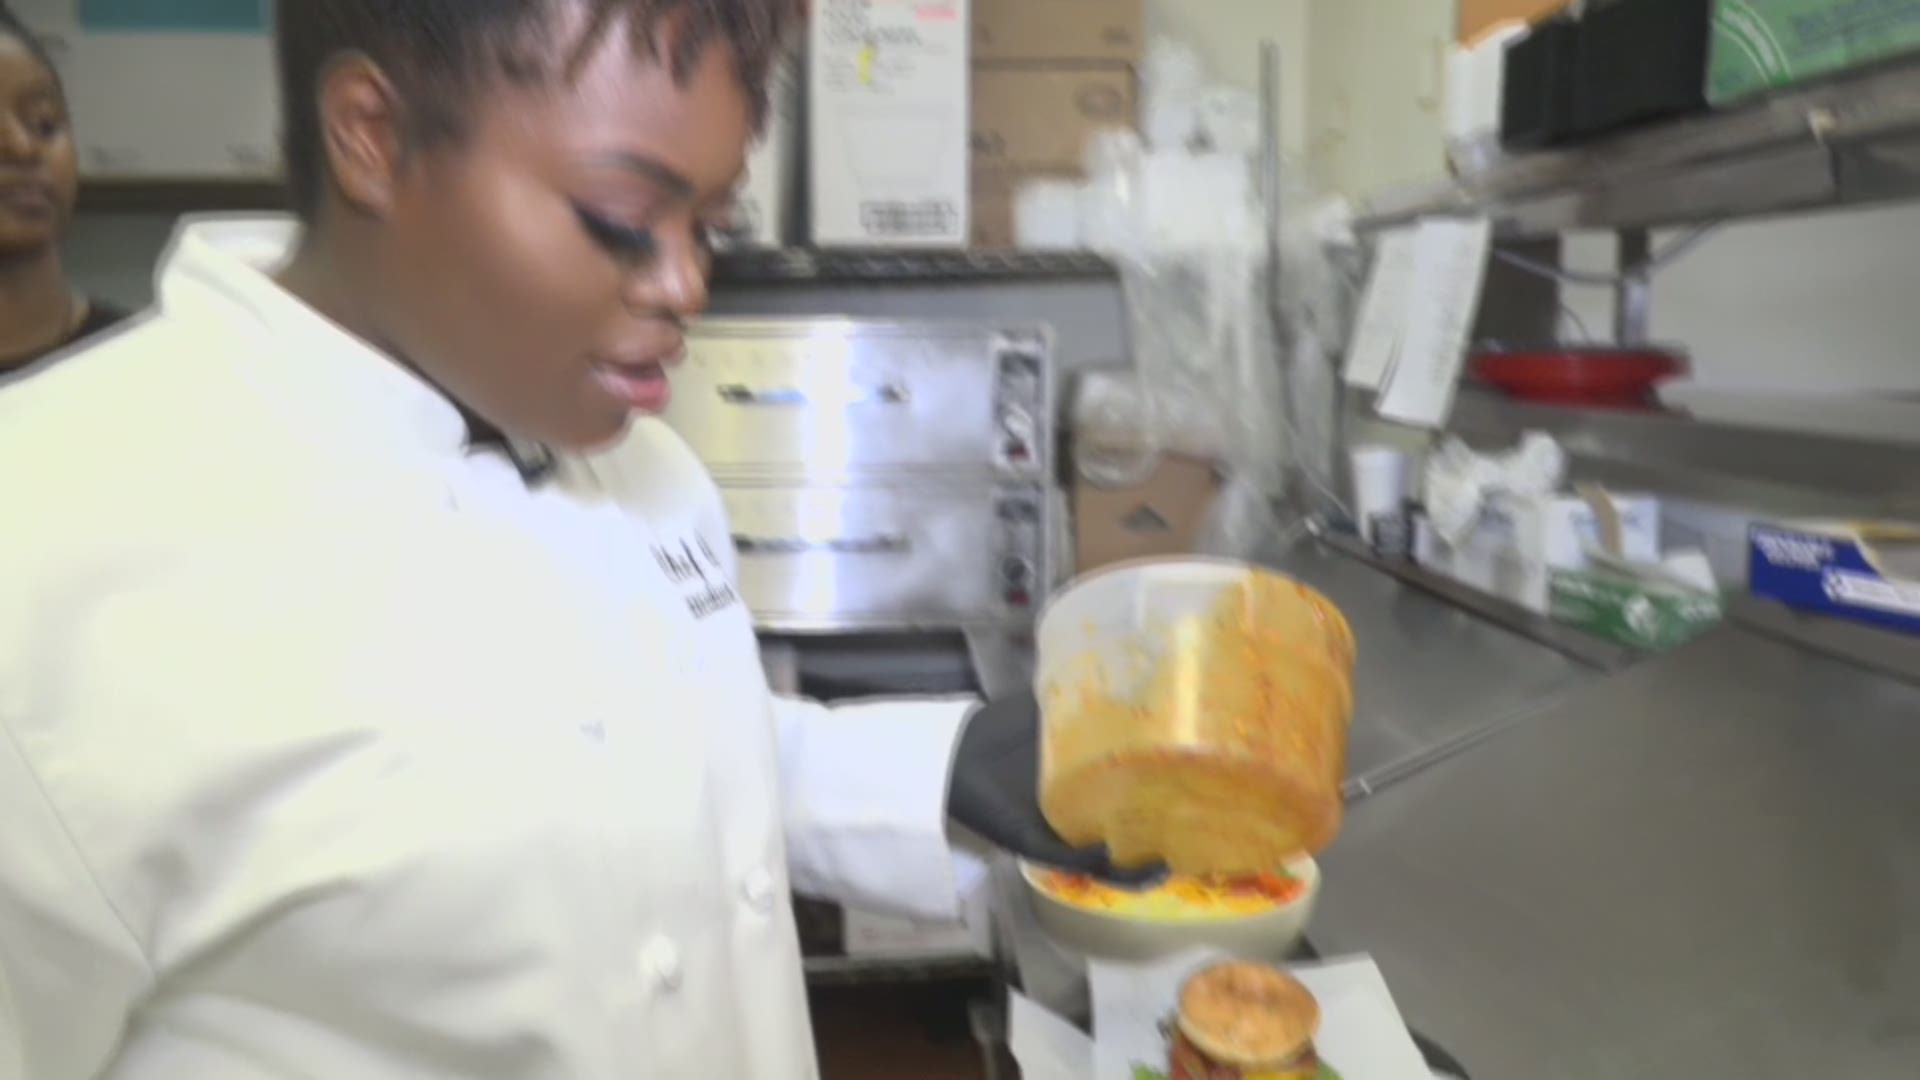 Army veteran turned sought after chef, shares her story.